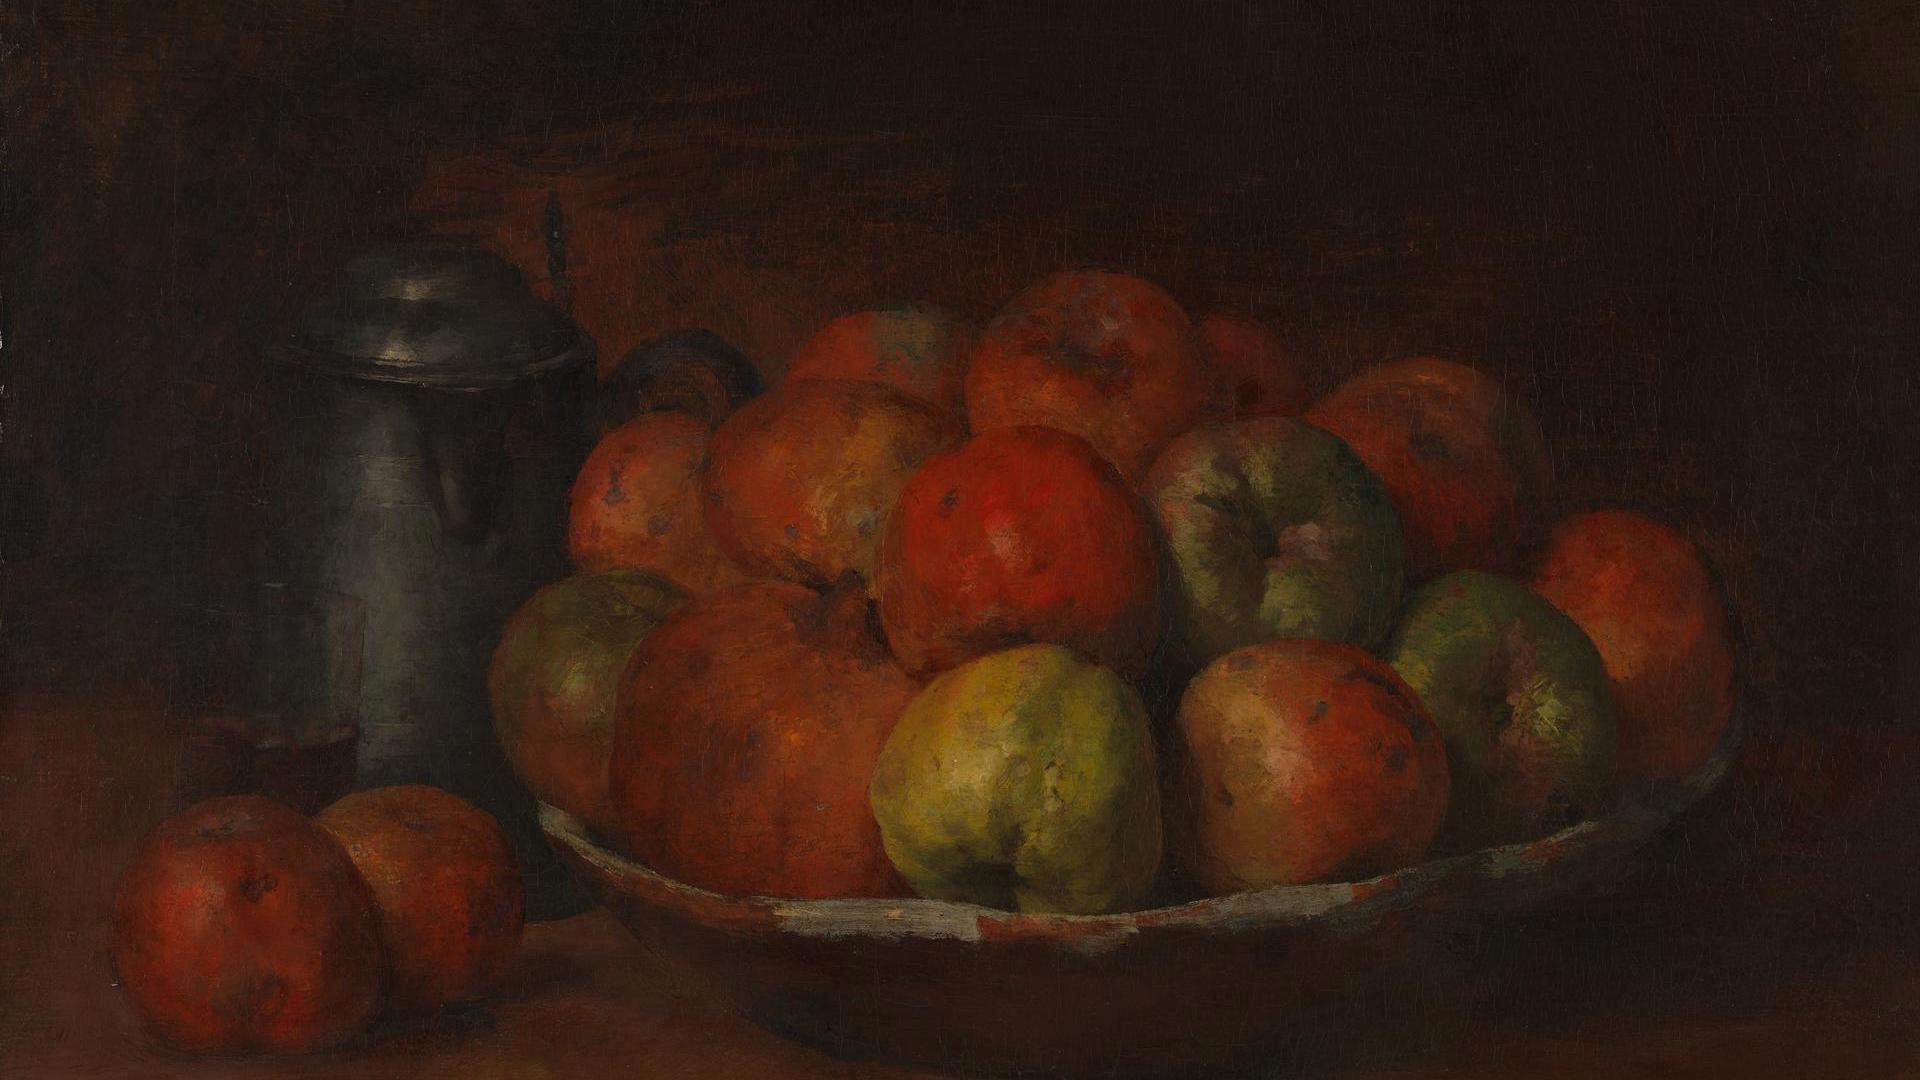 Gustave Courbet | Still Life with Apples and a Pomegranate | NG5983 |  National Gallery, London